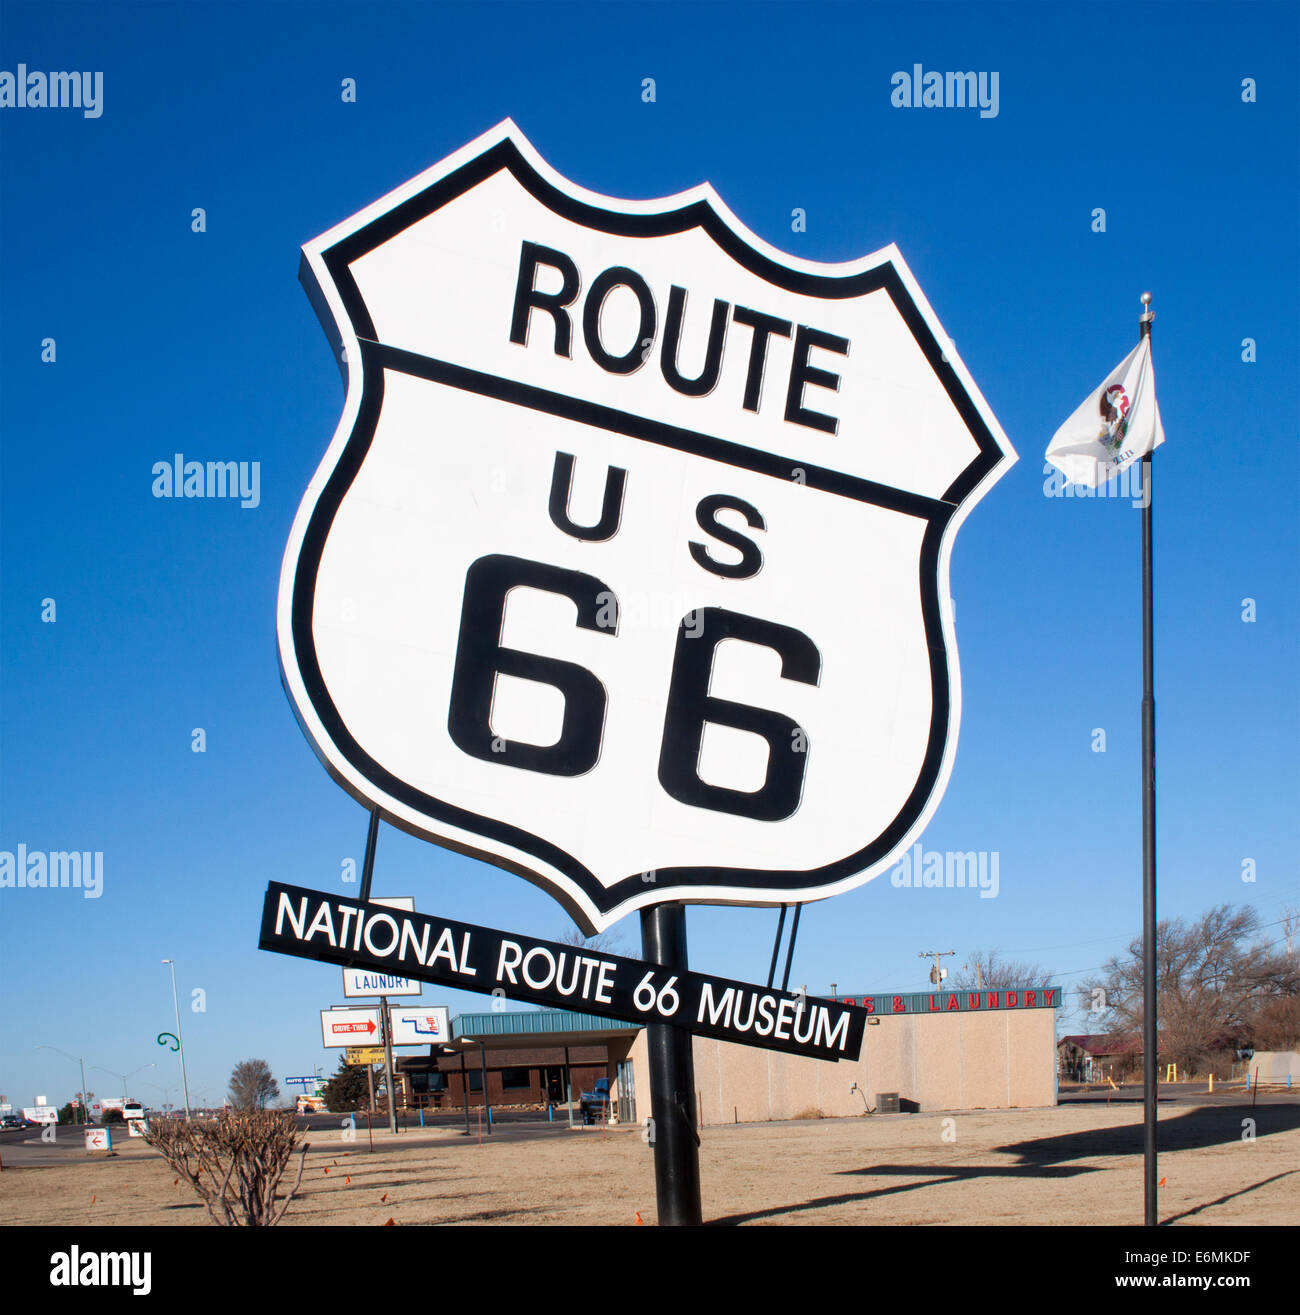 Route Nationale 66 Museum sign in Elk City New York Banque D'Images